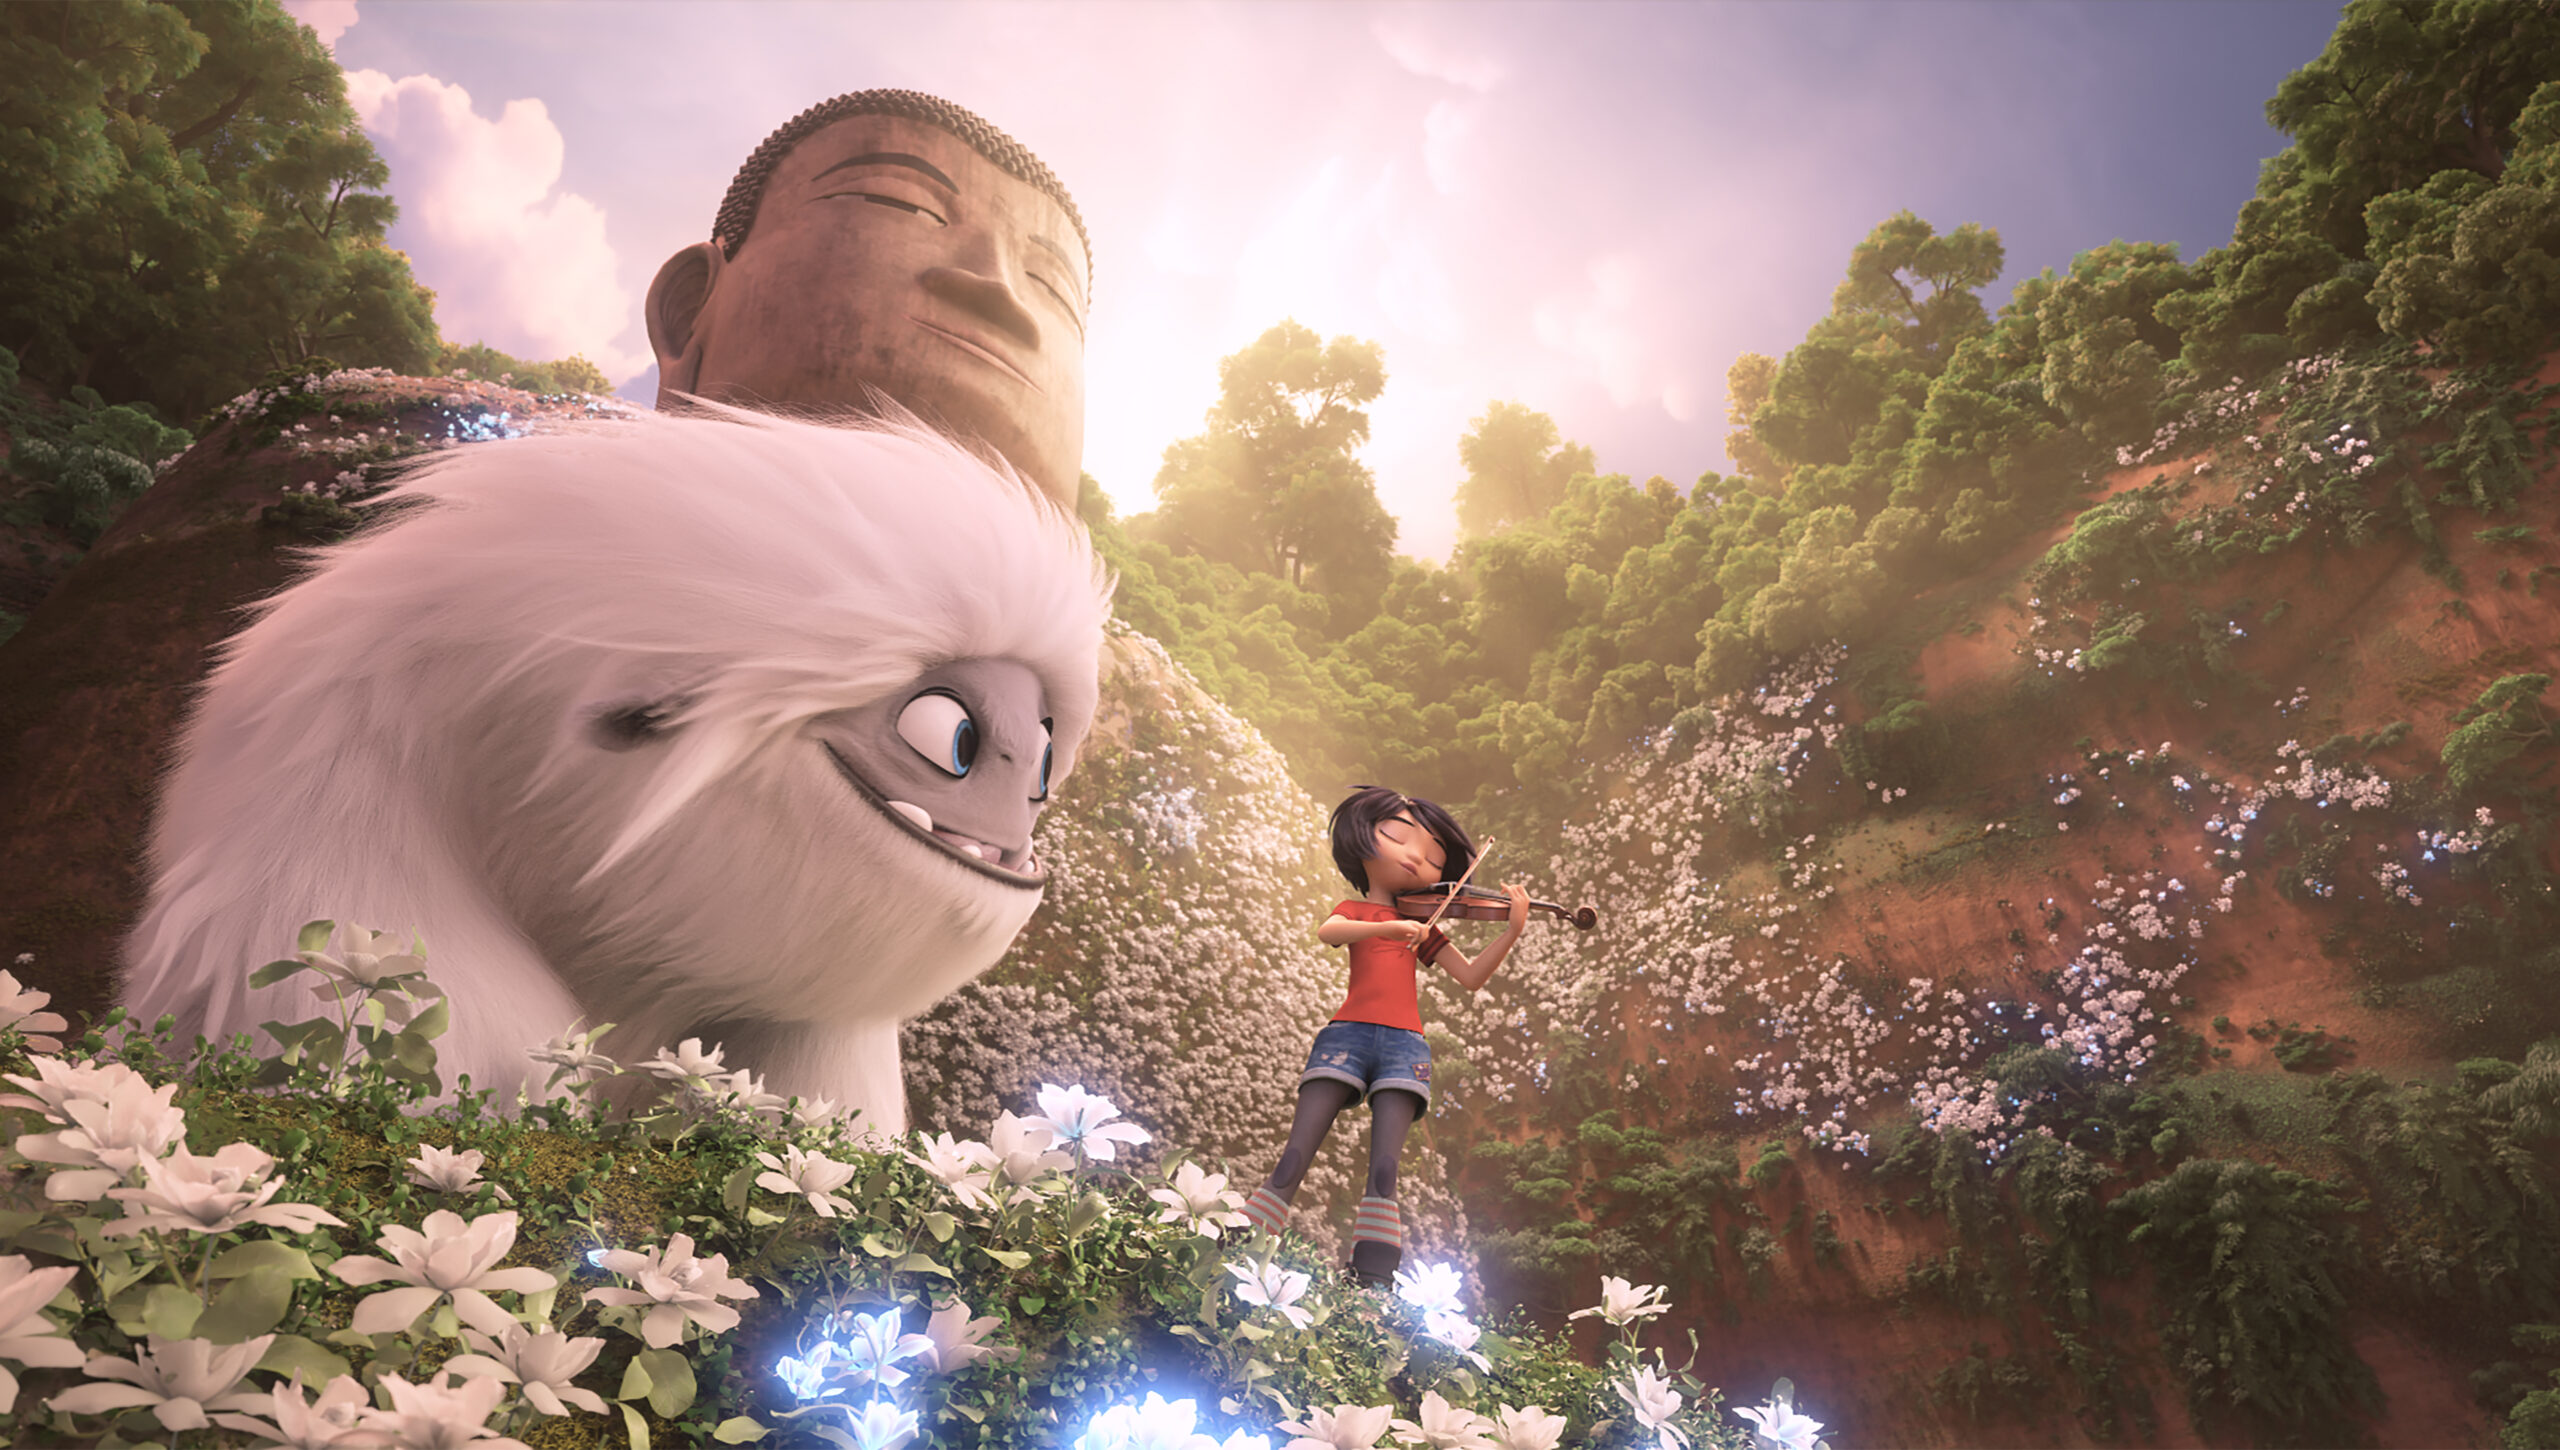 Everest the Yeti listens on as Yi (Chloe Bennet) plays her beloved violin in front of the Leshan Buddha in DreamWorks Animation and Pearl Studio’s "Abominable," written and directed by Jill Culton.